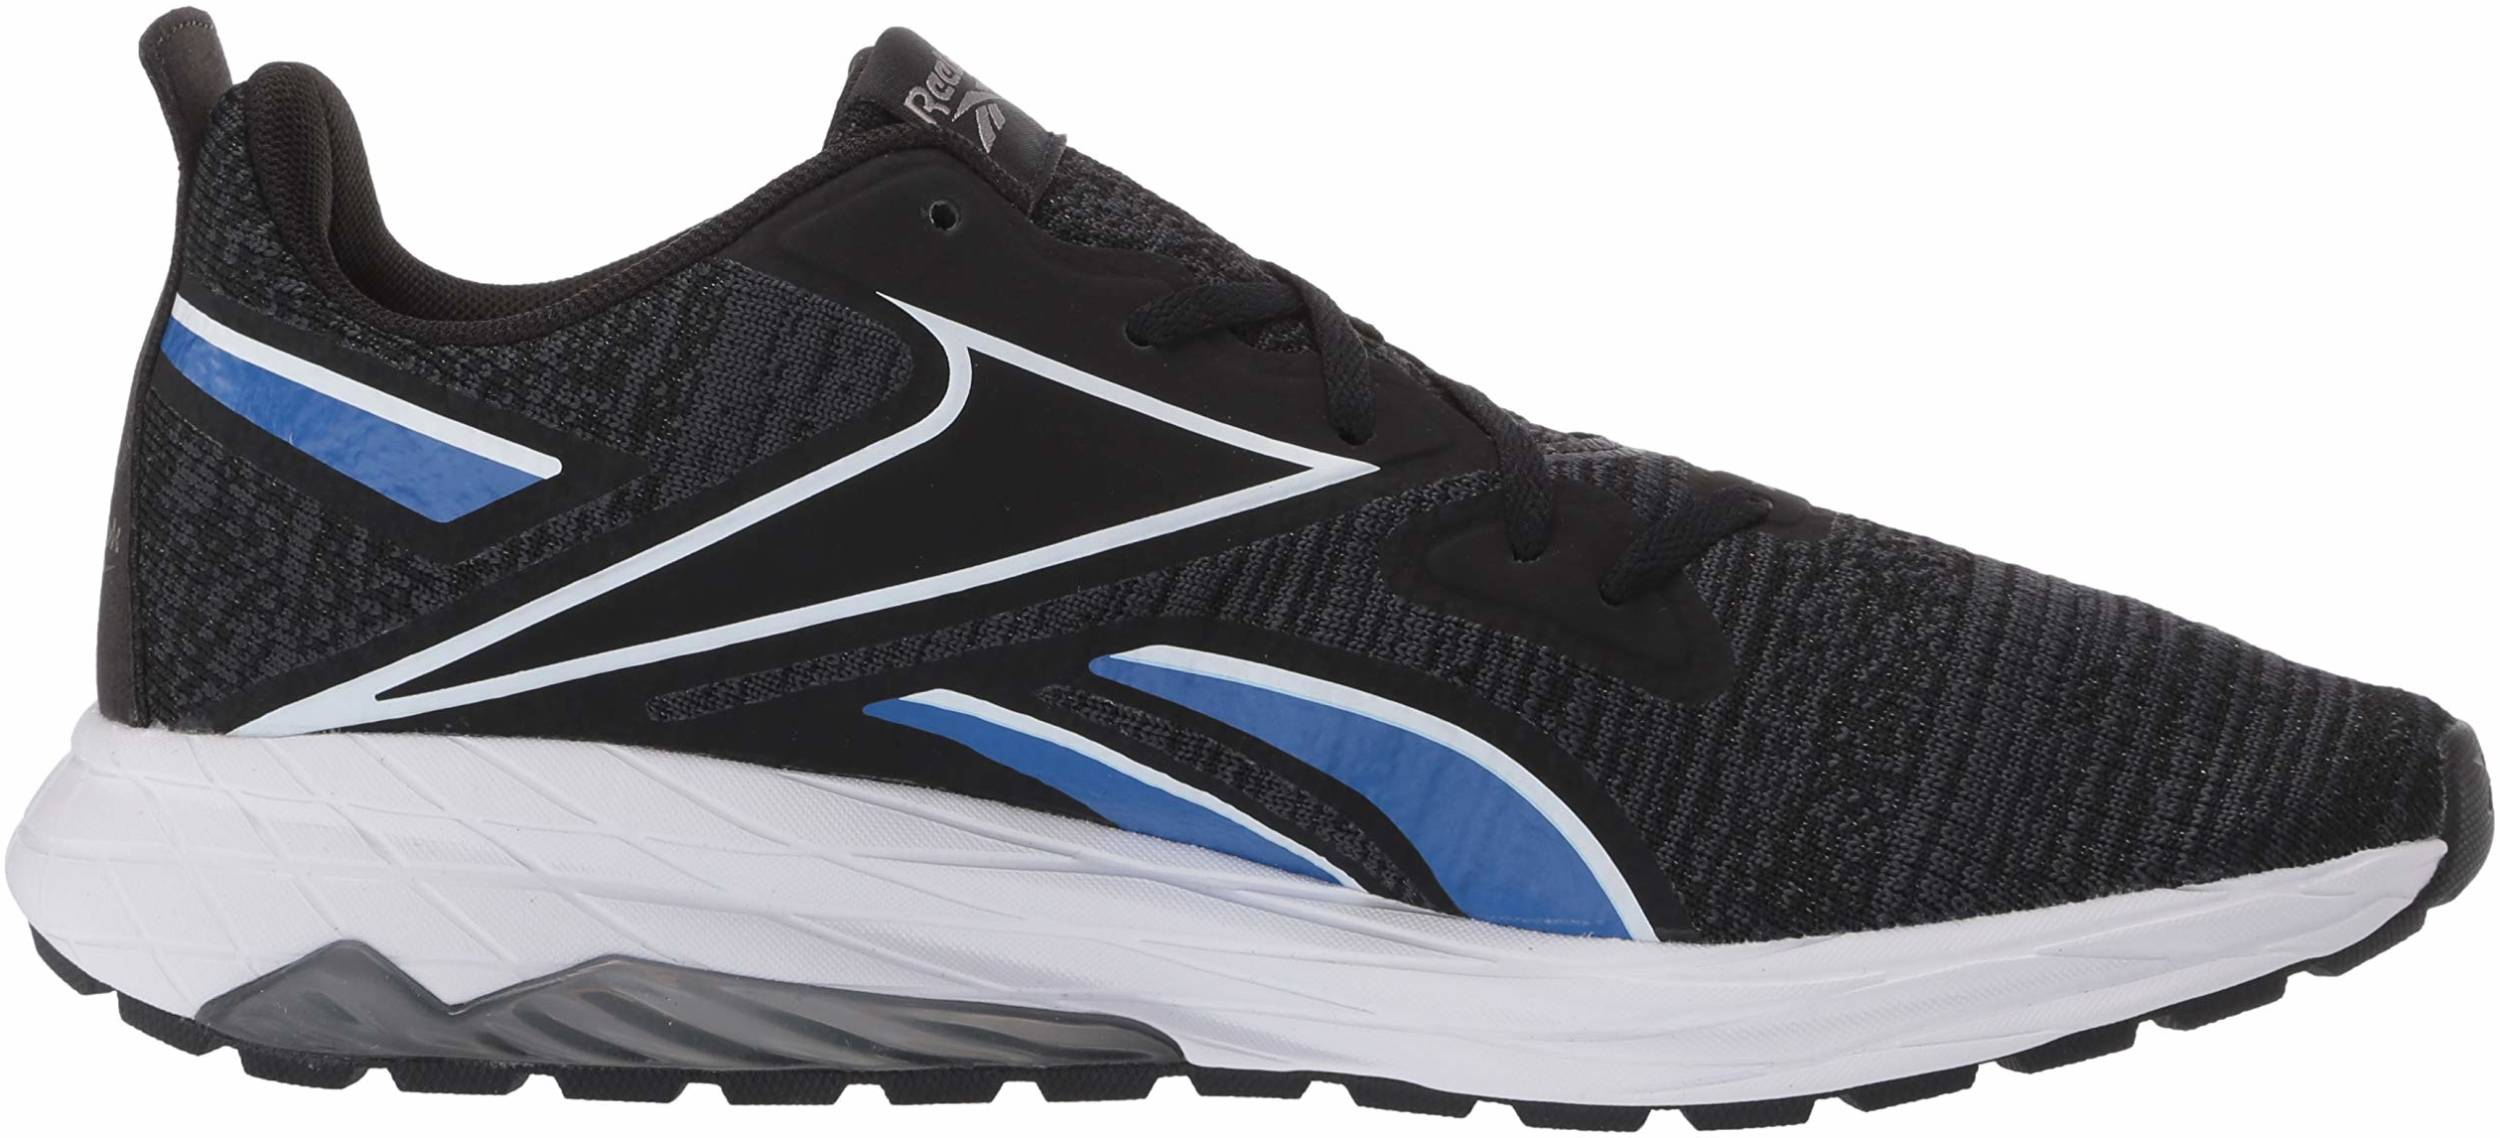 Save 54% on Reebok Running Shoes (120 